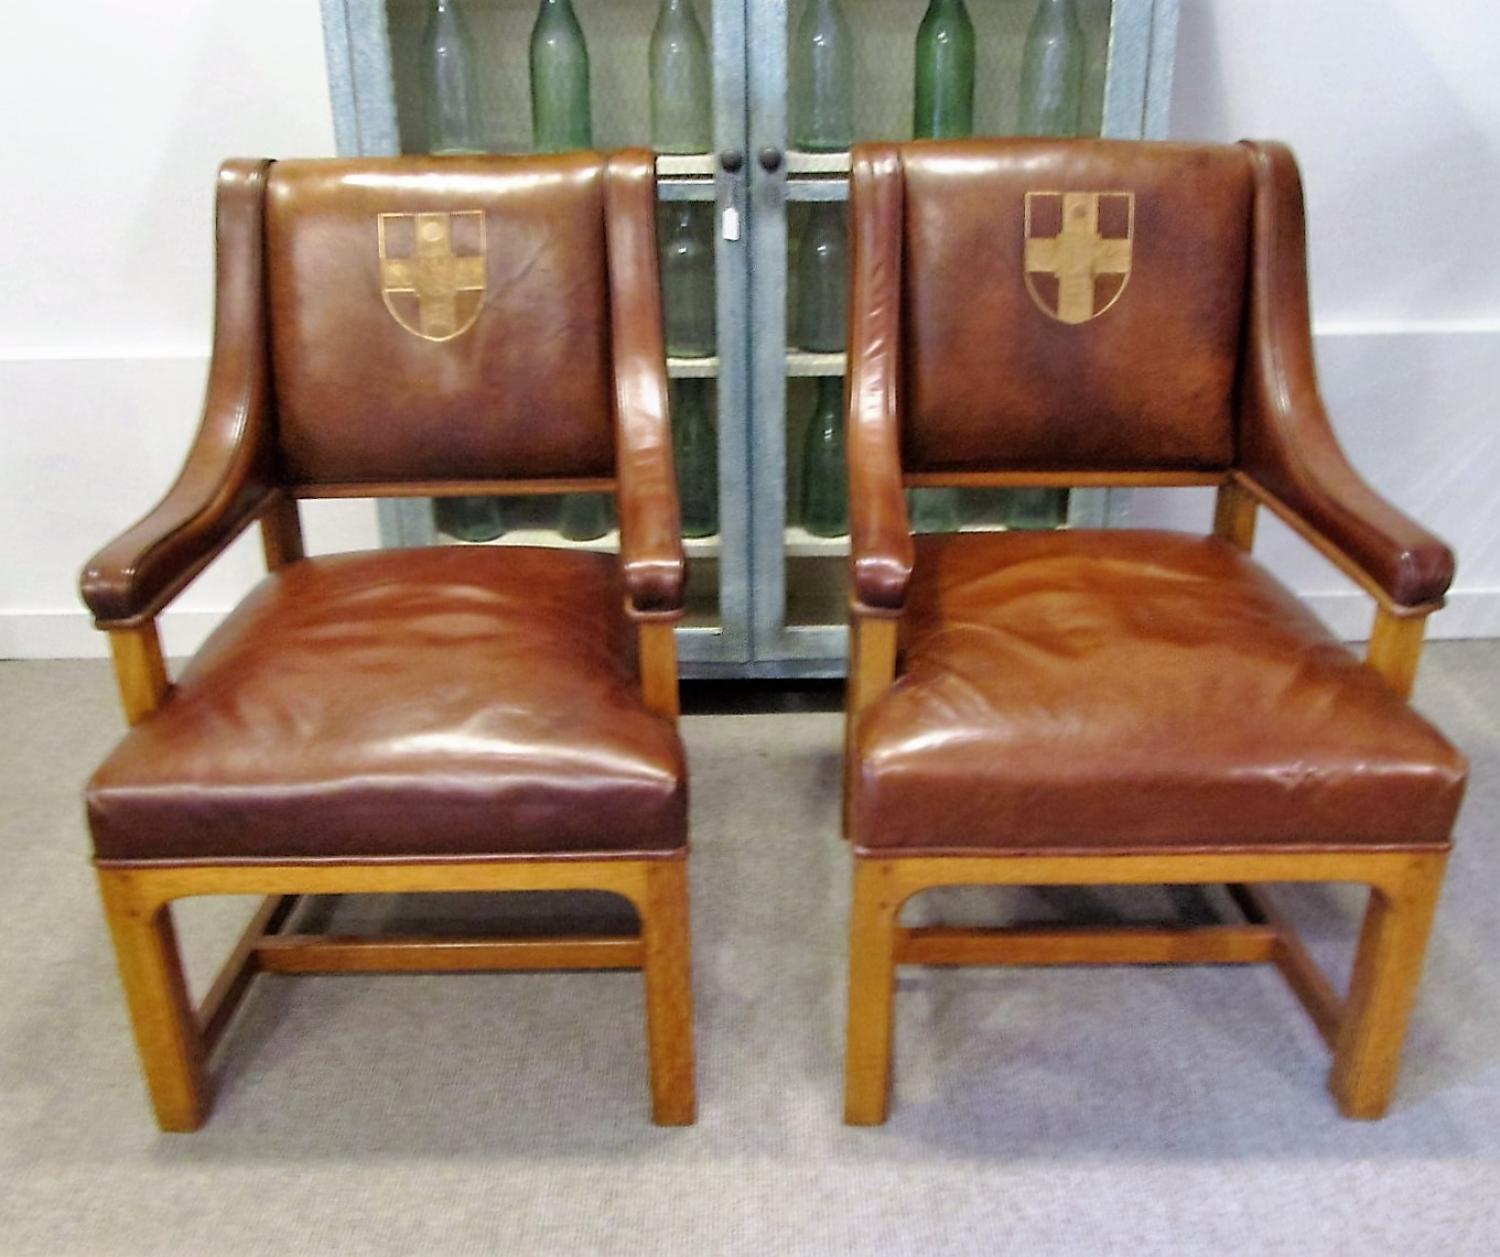 A pair of leather dean's chairs